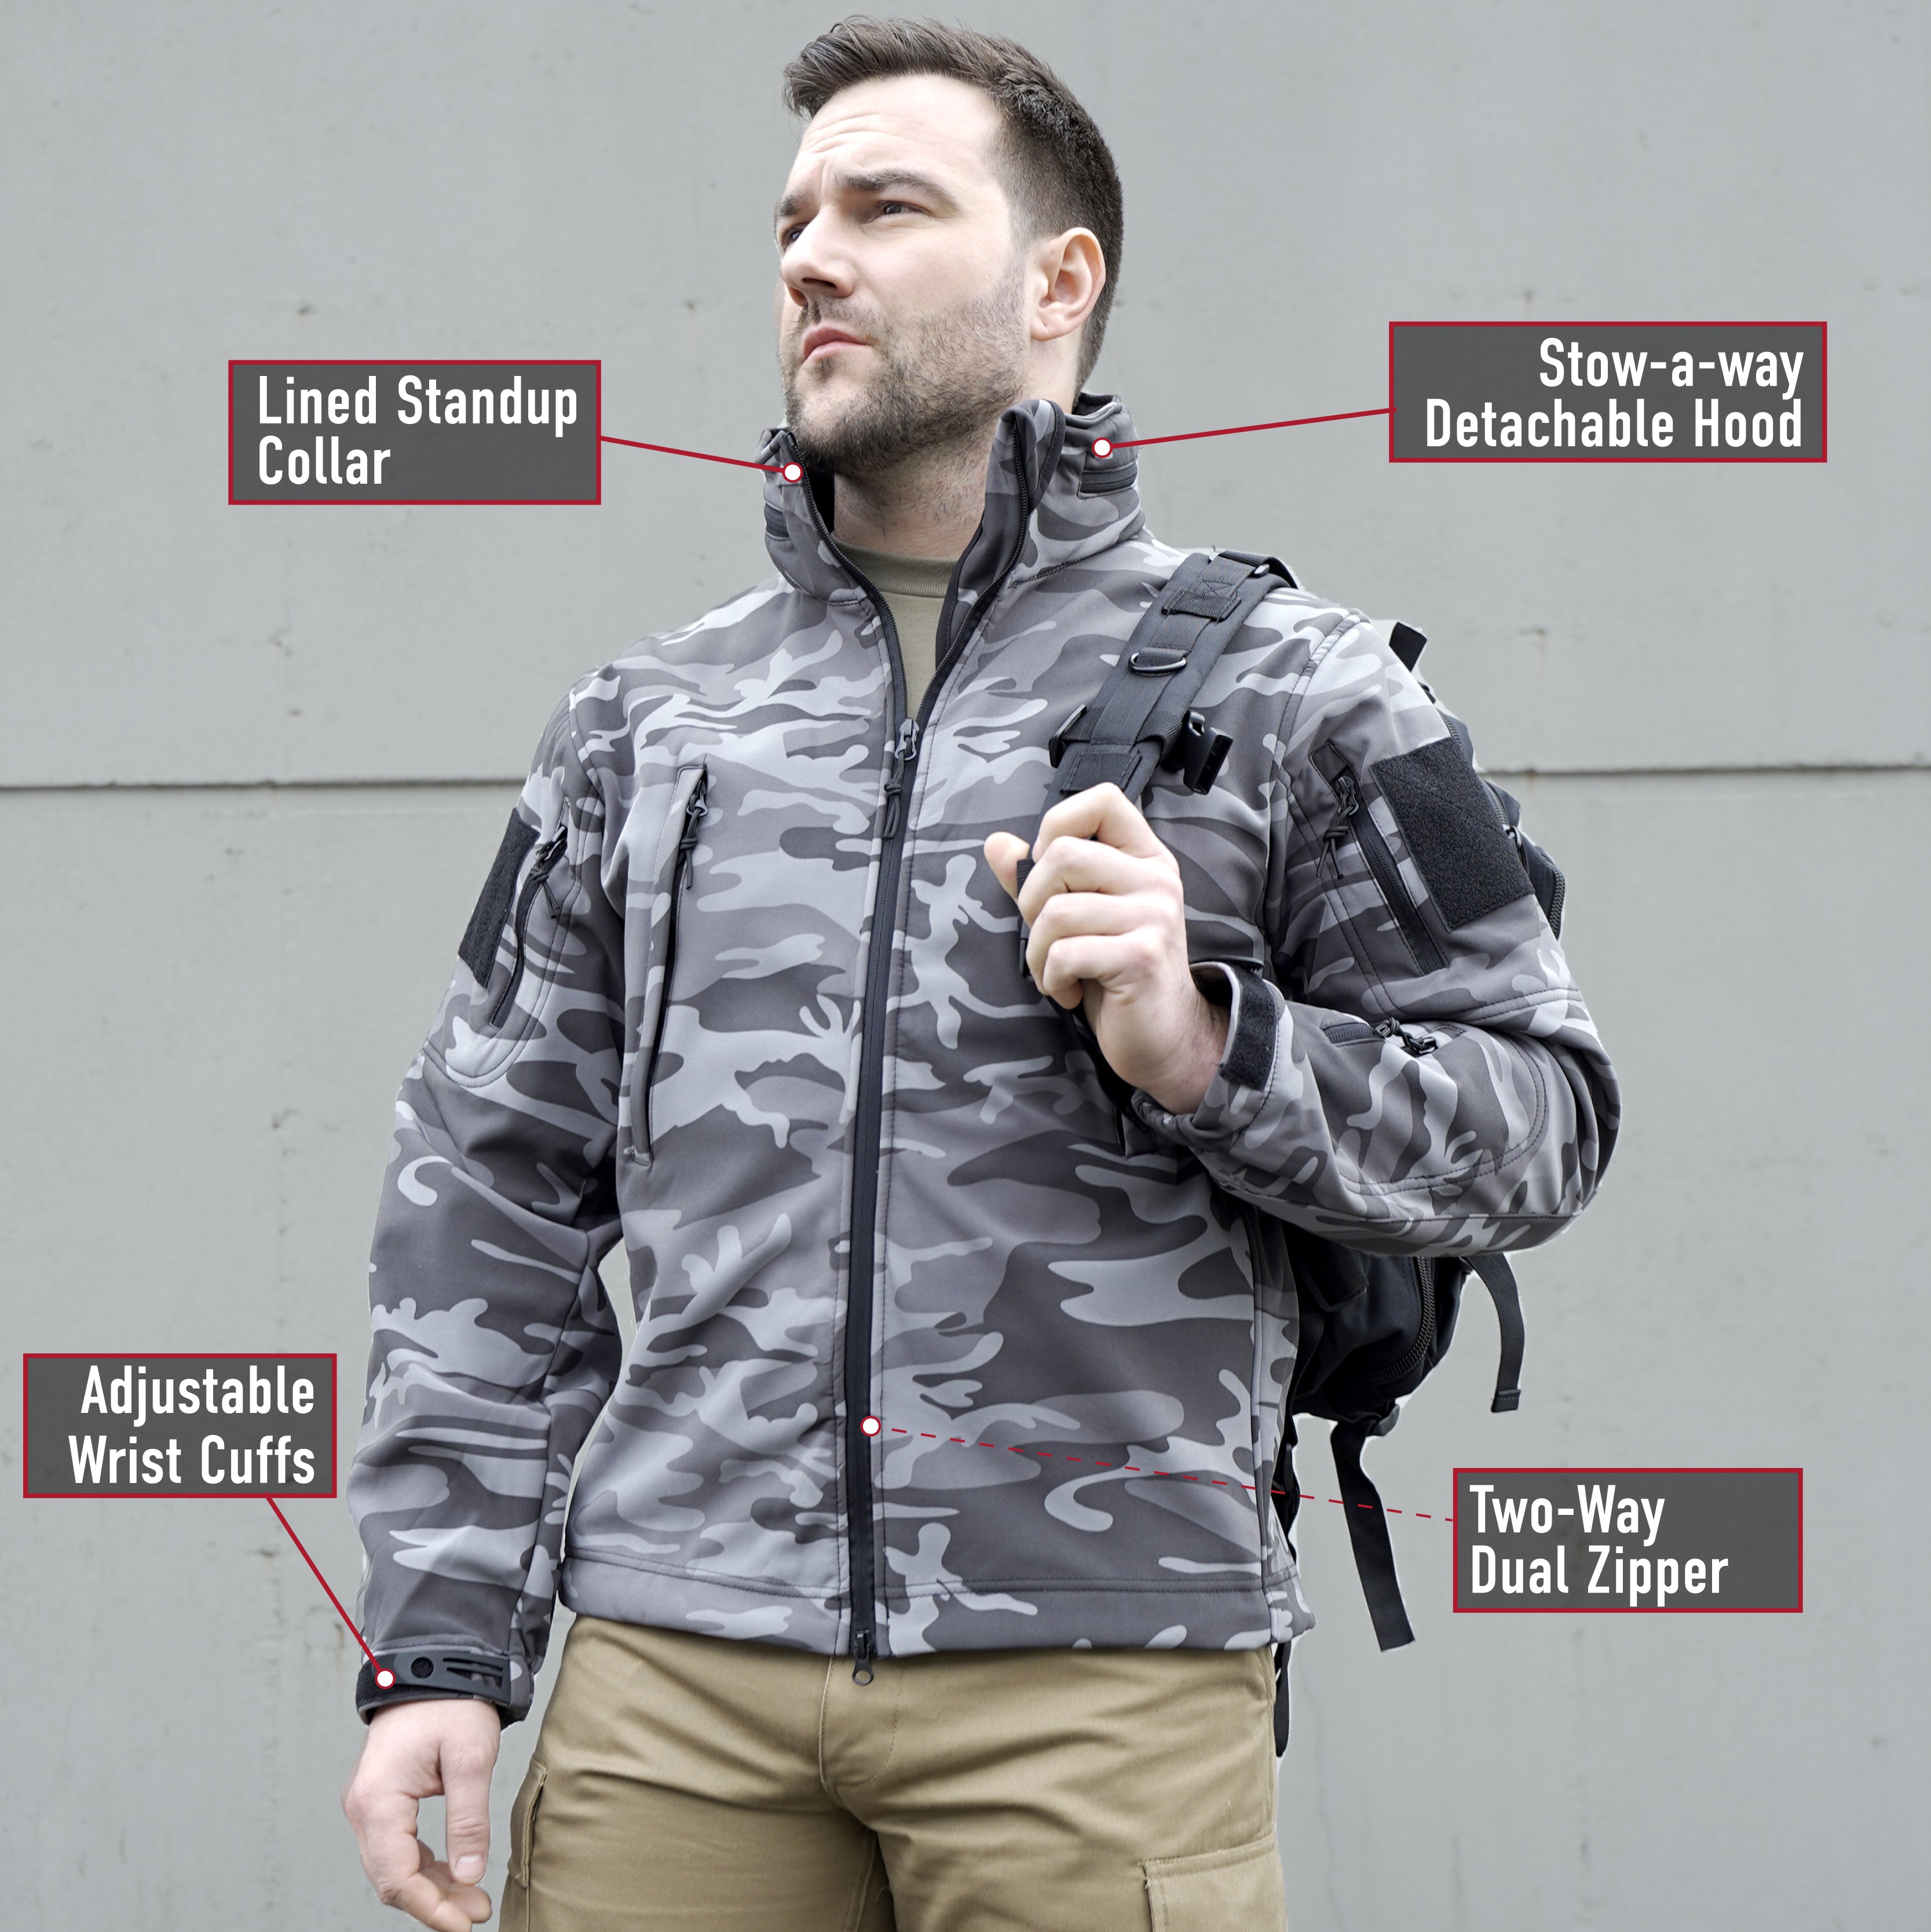 [Public Safety] Poly Security Spec Ops Tactical Soft Shell Jackets